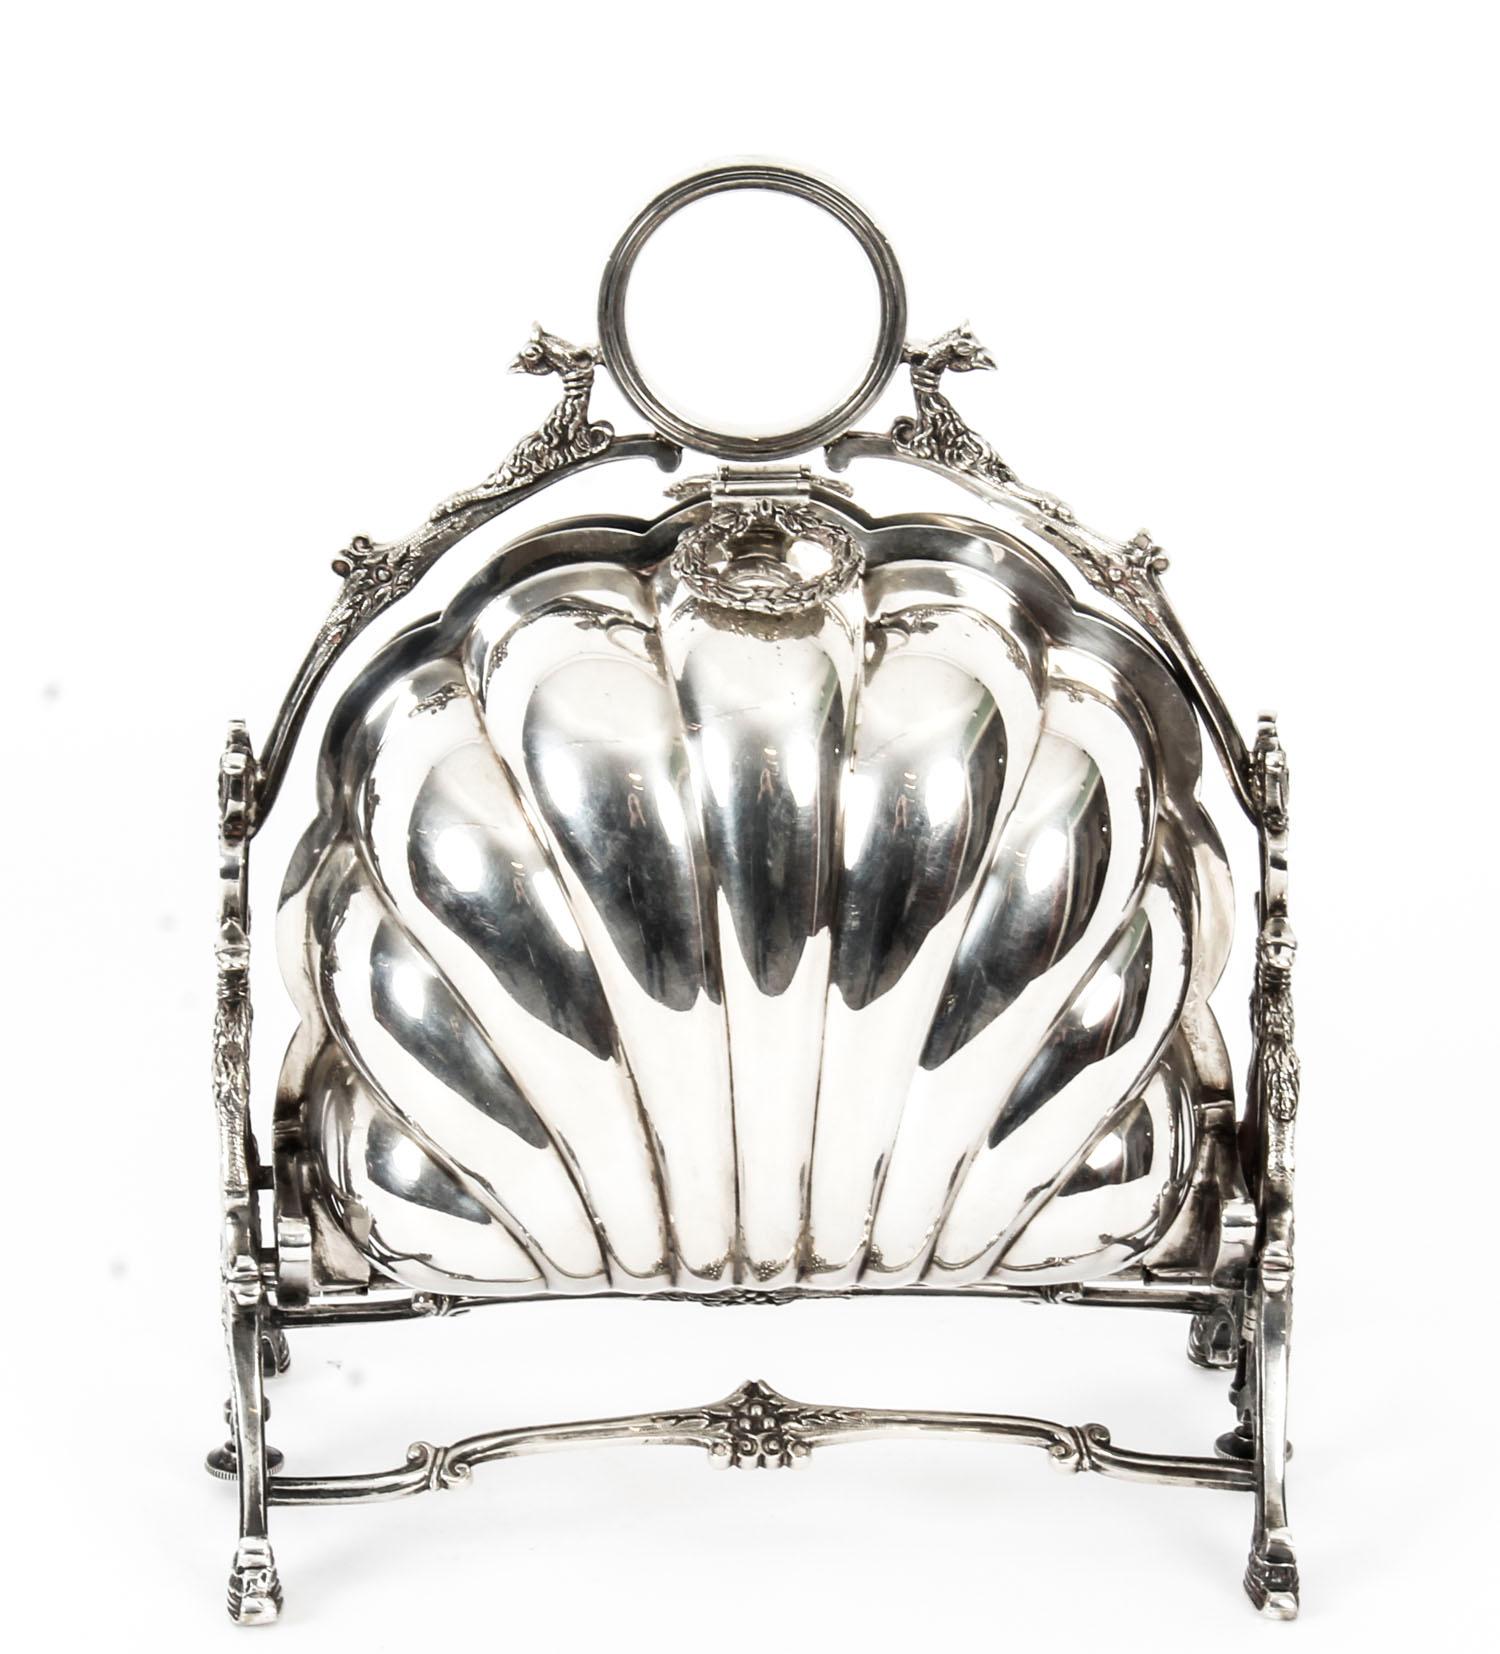 This is a highly decorative antique Victorian silver plated folding biscuit box, the base bearing the makers' mark of the renowned silversmiths Walker & Hall of Sheffield, England, circa 1888 in date and bearing the year stamp 88.

It has a plain